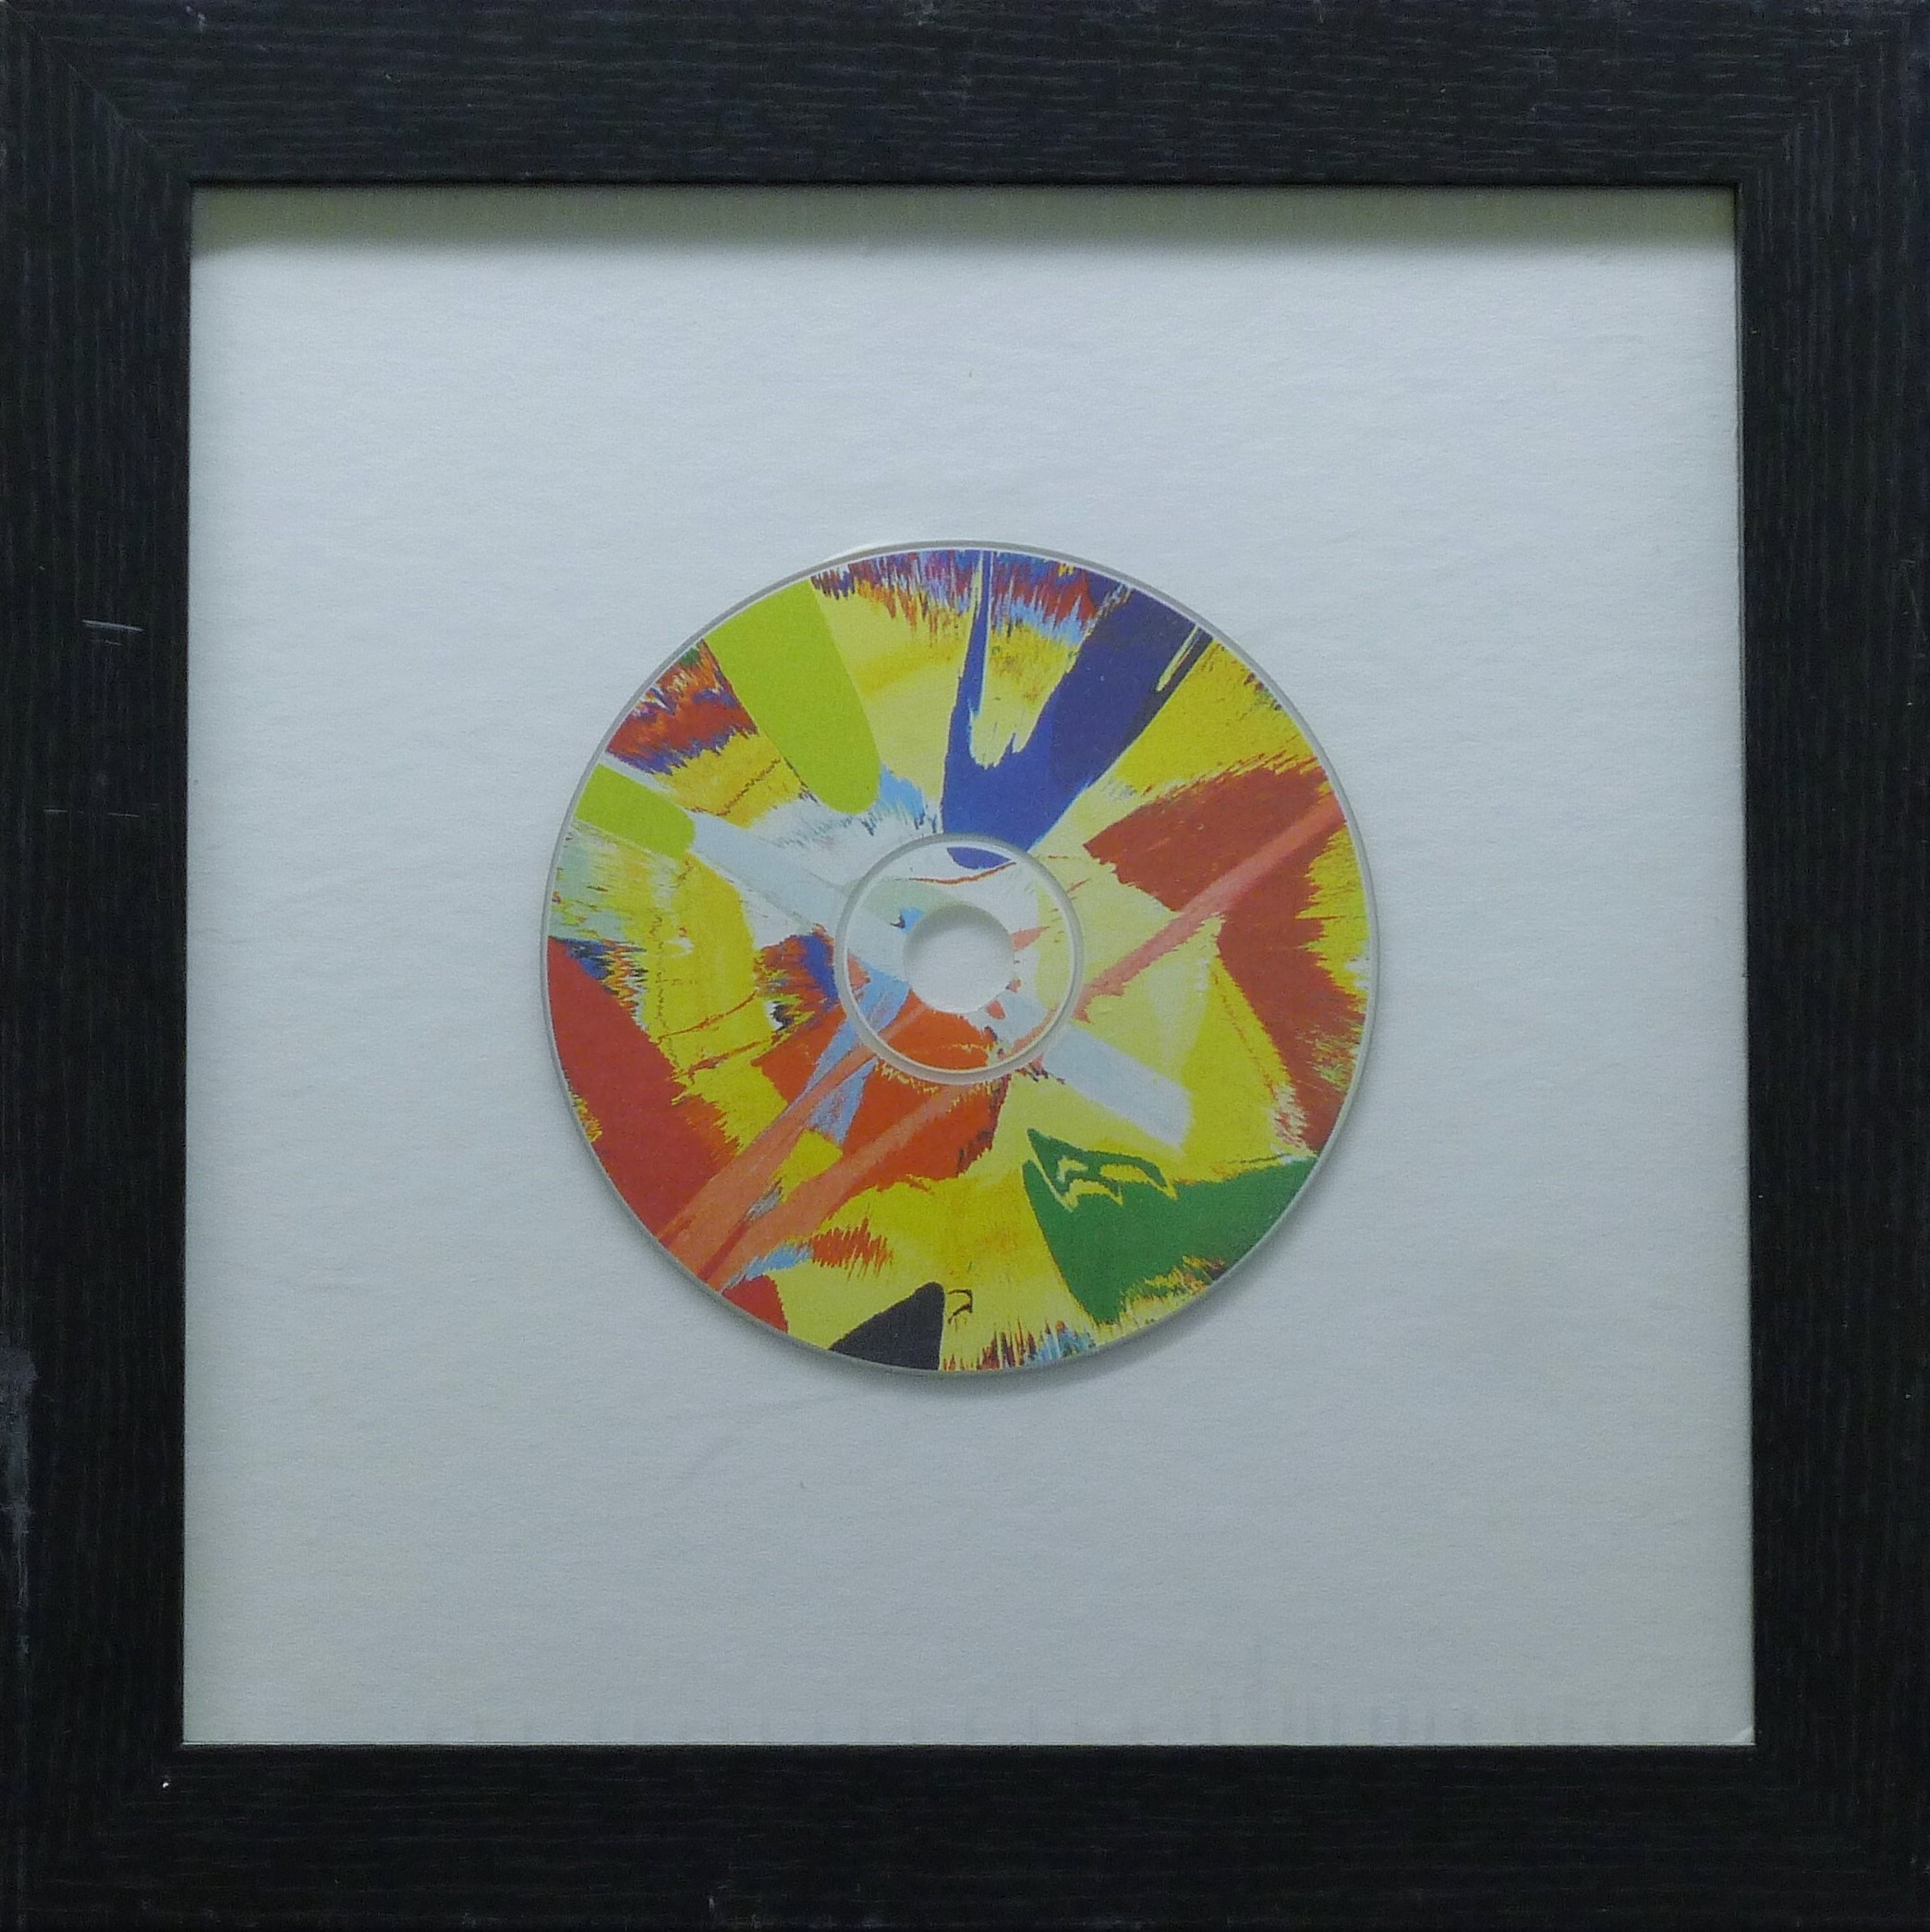 HIRST, DAMIEN (born 1965) British (AR), a Spin CD, a limited edition of 10, - Image 2 of 2